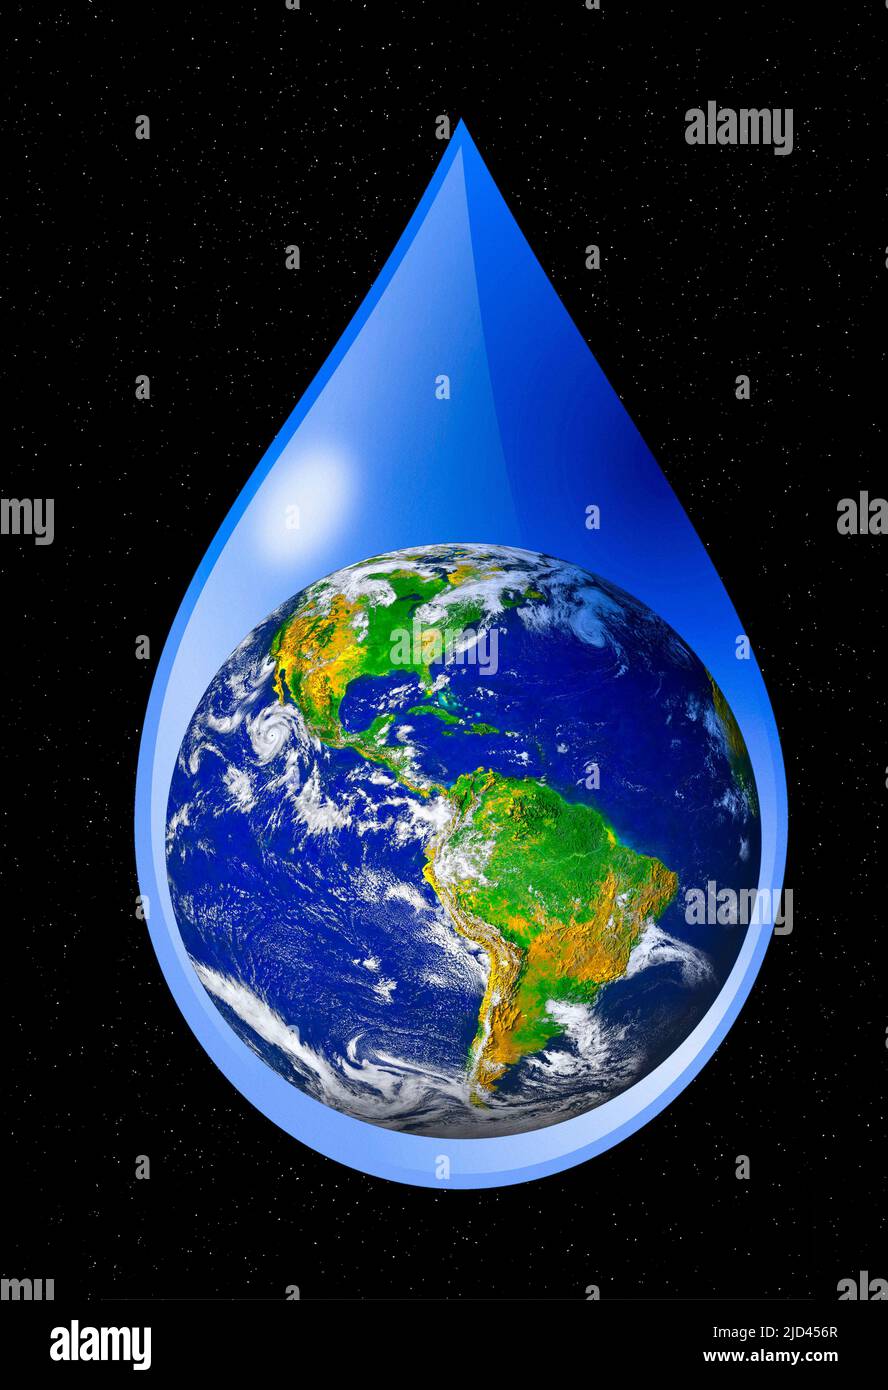 Earth in a water droplet Stock Photo